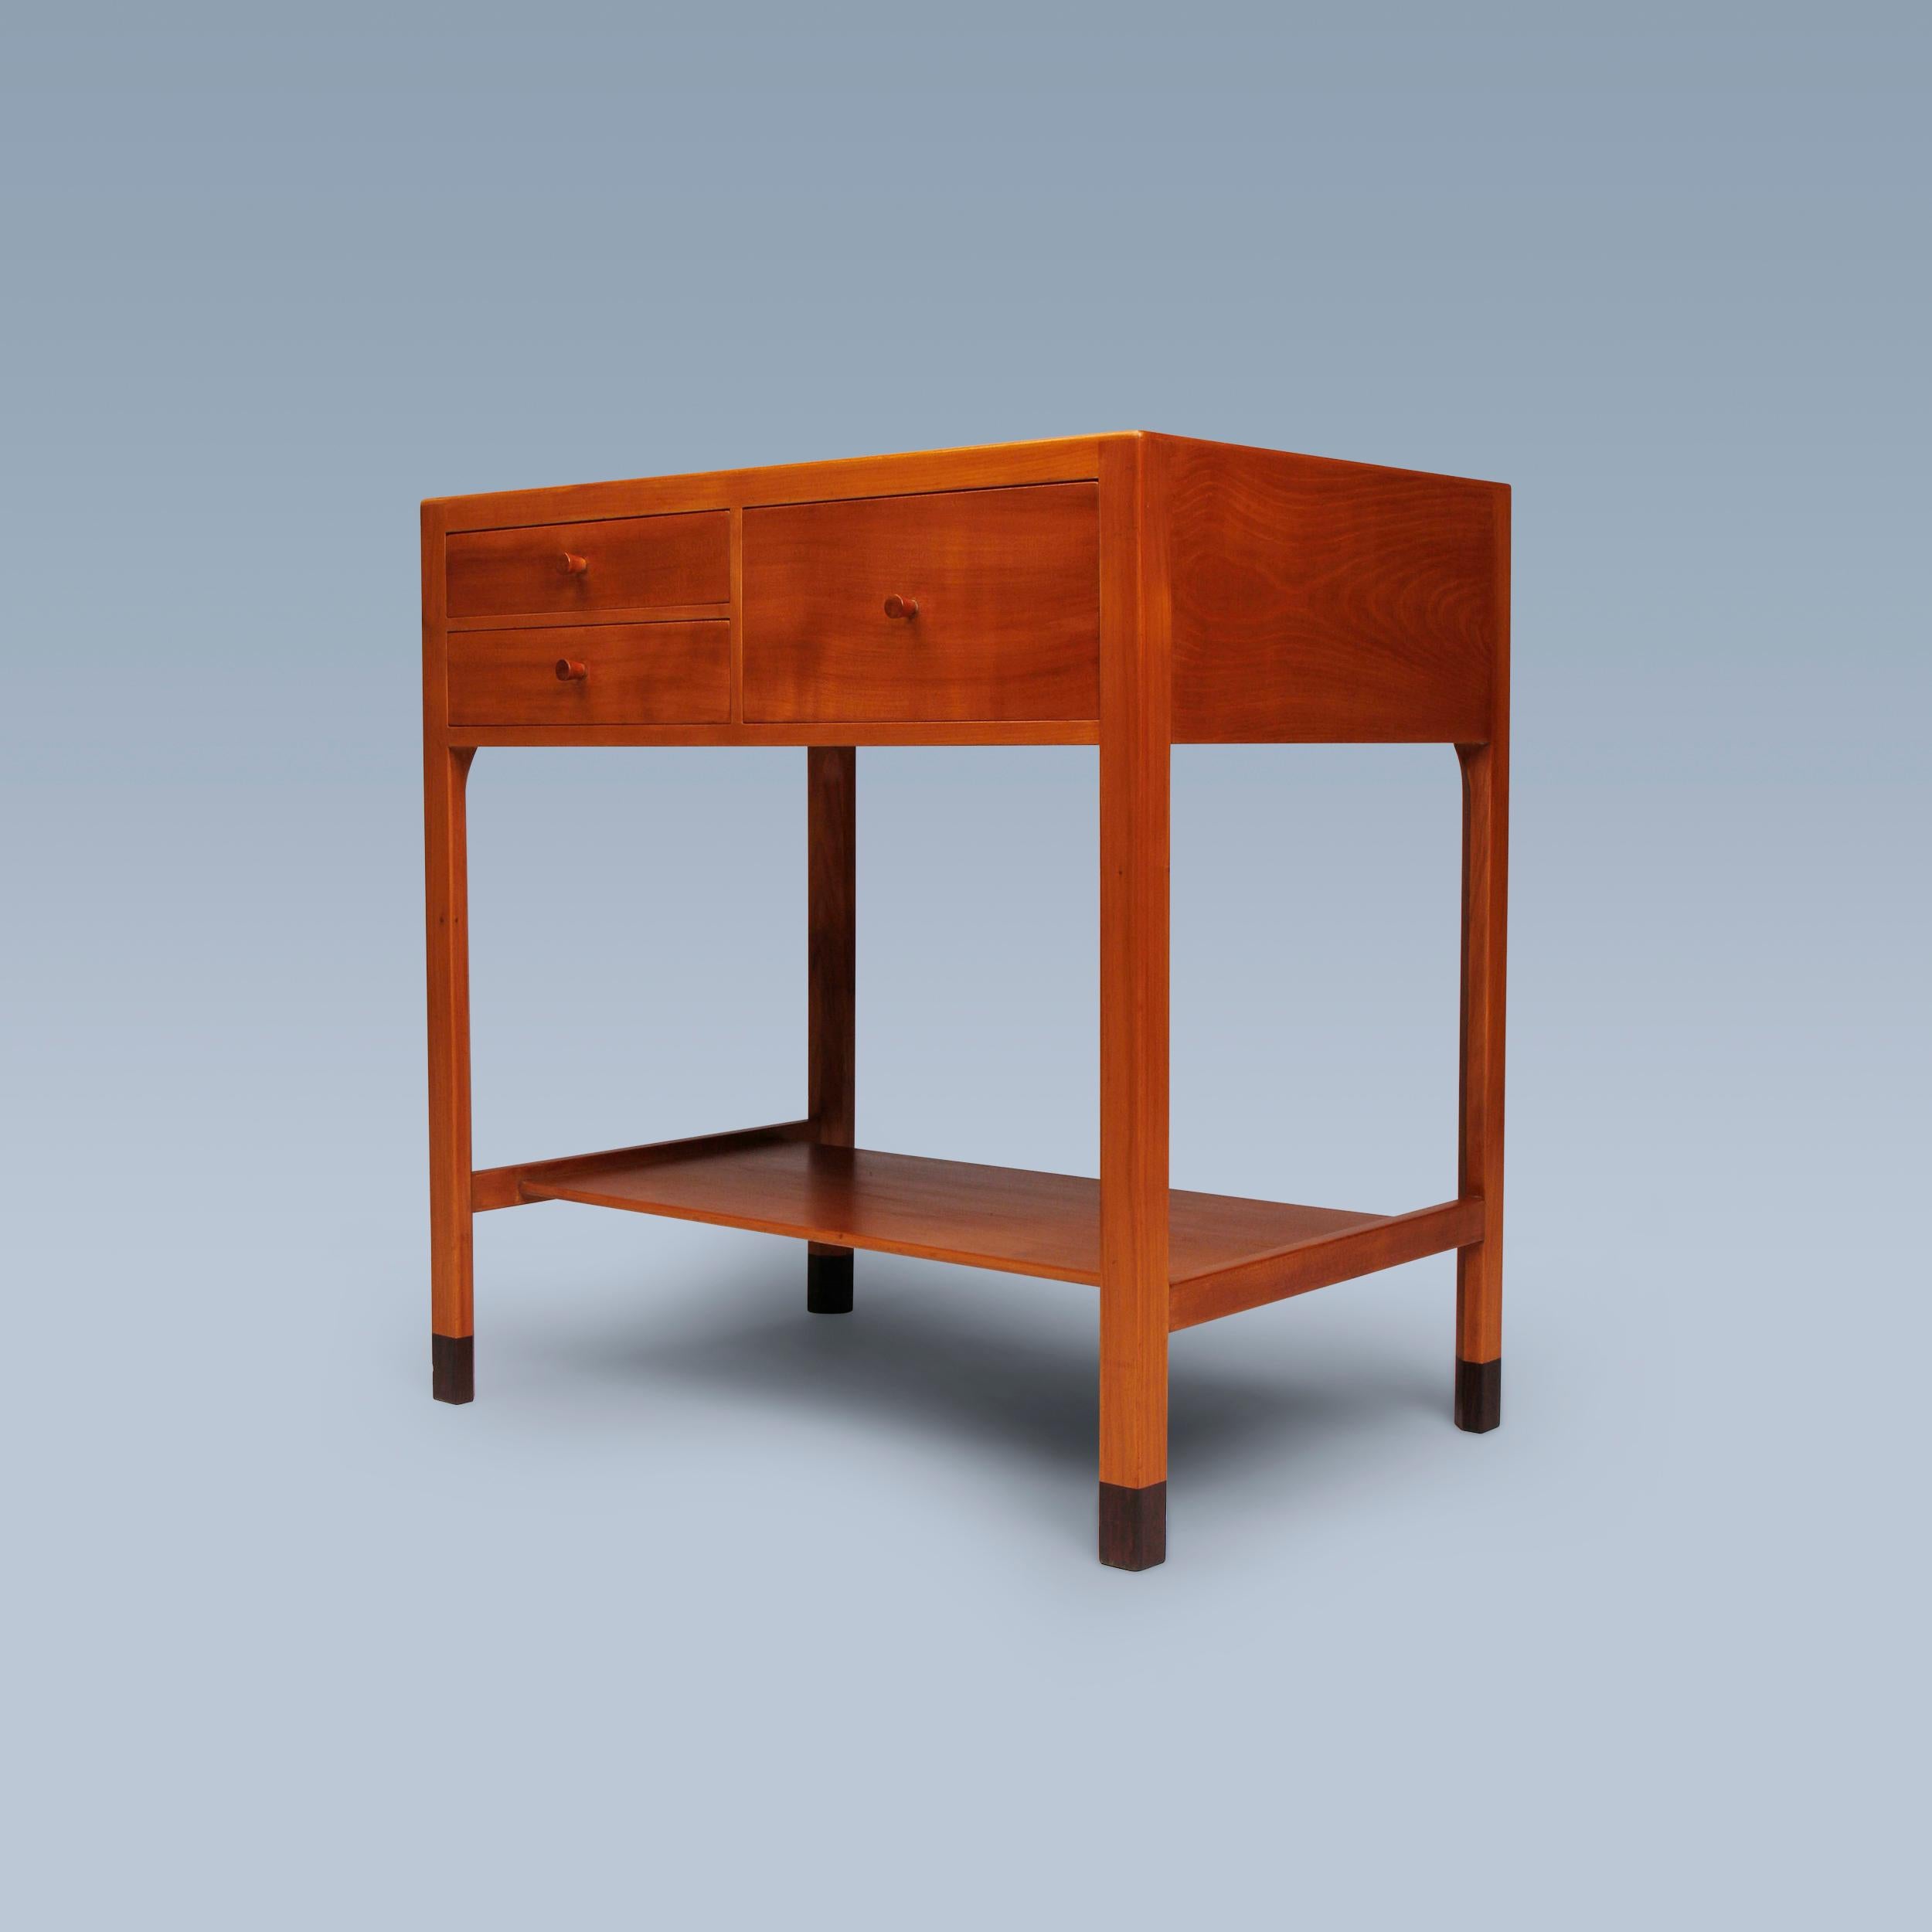 Hand-Crafted Danish modern cherry wood side table with drawers and shelf For Sale